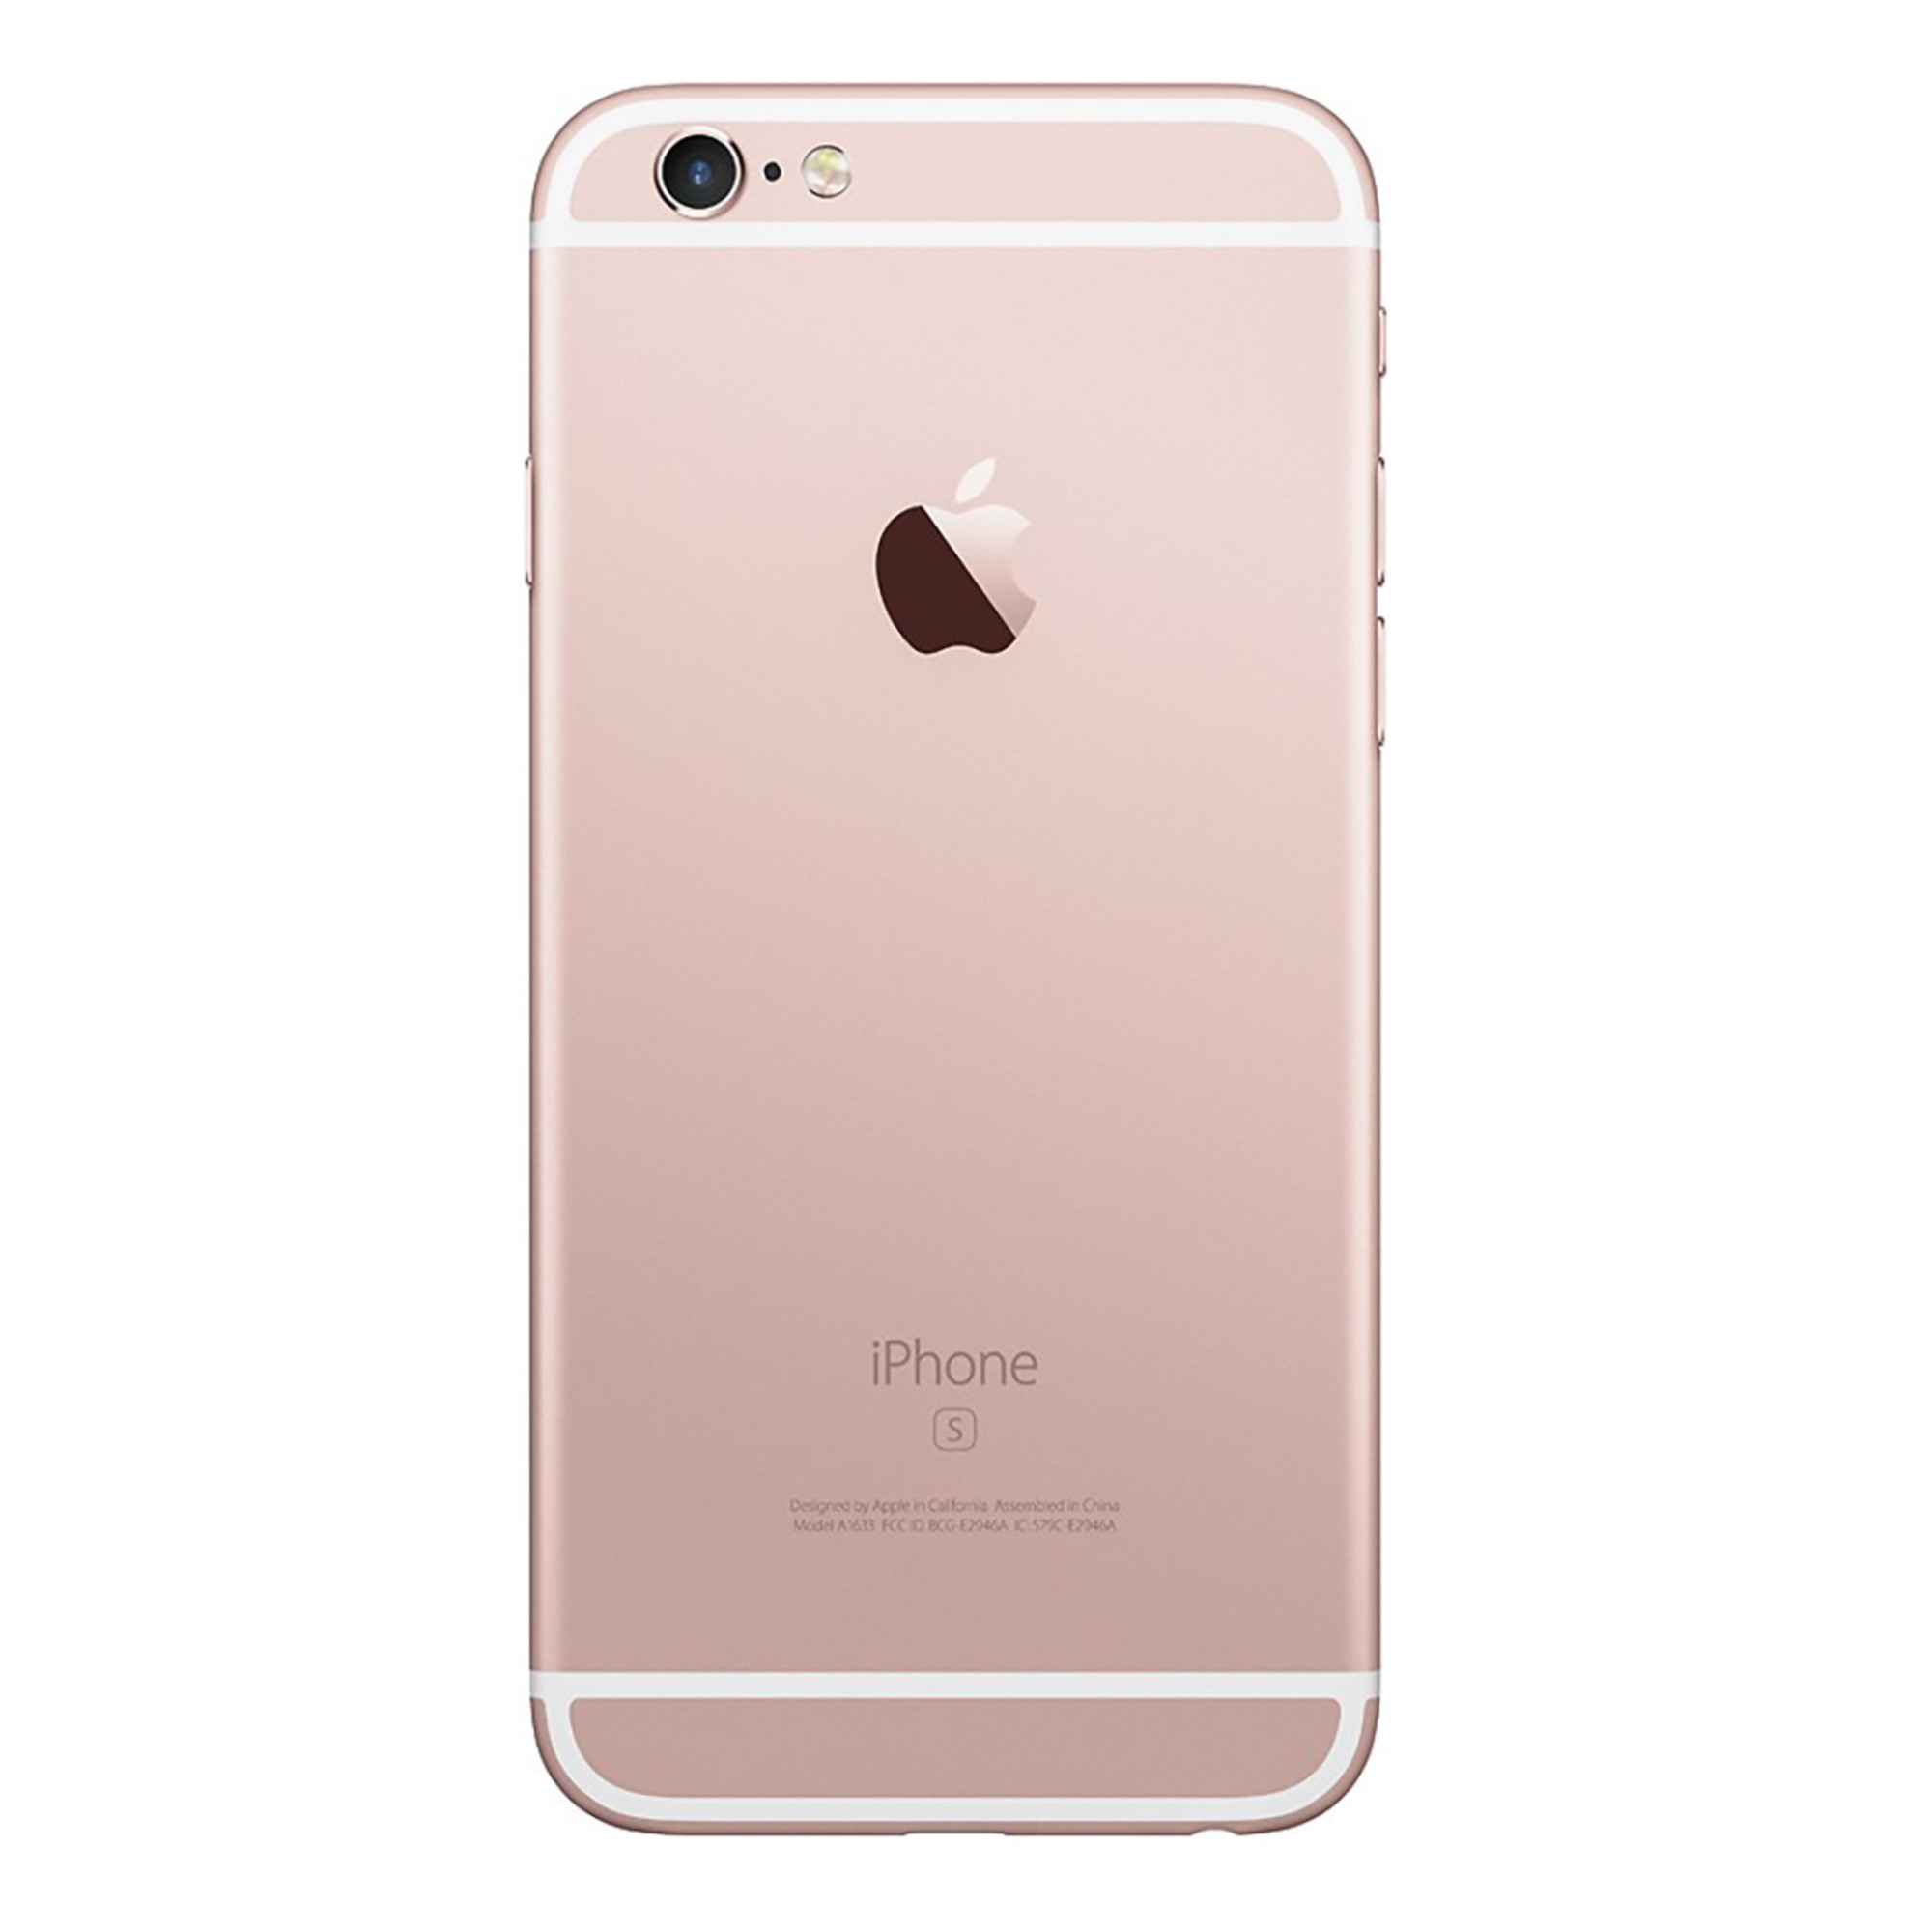 Apple iPhone 6s 64GB GSM Phone - Rose Gold (Used) + WeCare Alcohol Wipes Pack (50 Wipes) - image 2 of 6